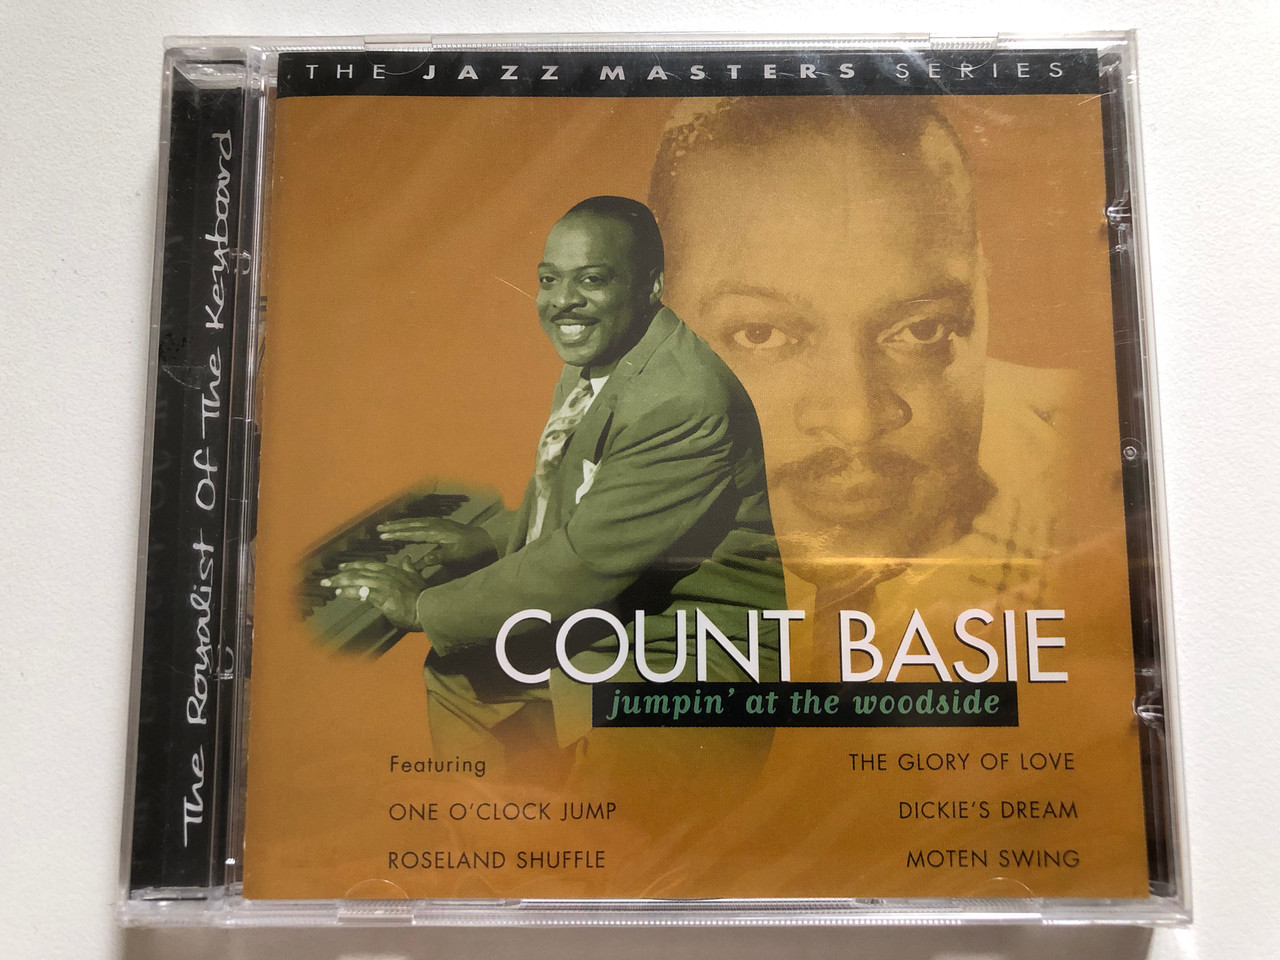 https://cdn10.bigcommerce.com/s-62bdpkt7pb/products/0/images/306579/Count_Basie_Jumpin_At_The_Woodside_Featuring_One_Oclock_Jump_Roseland_Shuffle_The_Glory_Of_Love_Dickies_Dream_Moten_Swing_The_Jazz_Masters_Series_Prism_Leisure_Audio_CD_2002_PLAT_1__04468.1698311120.1280.1280.JPG?c=2